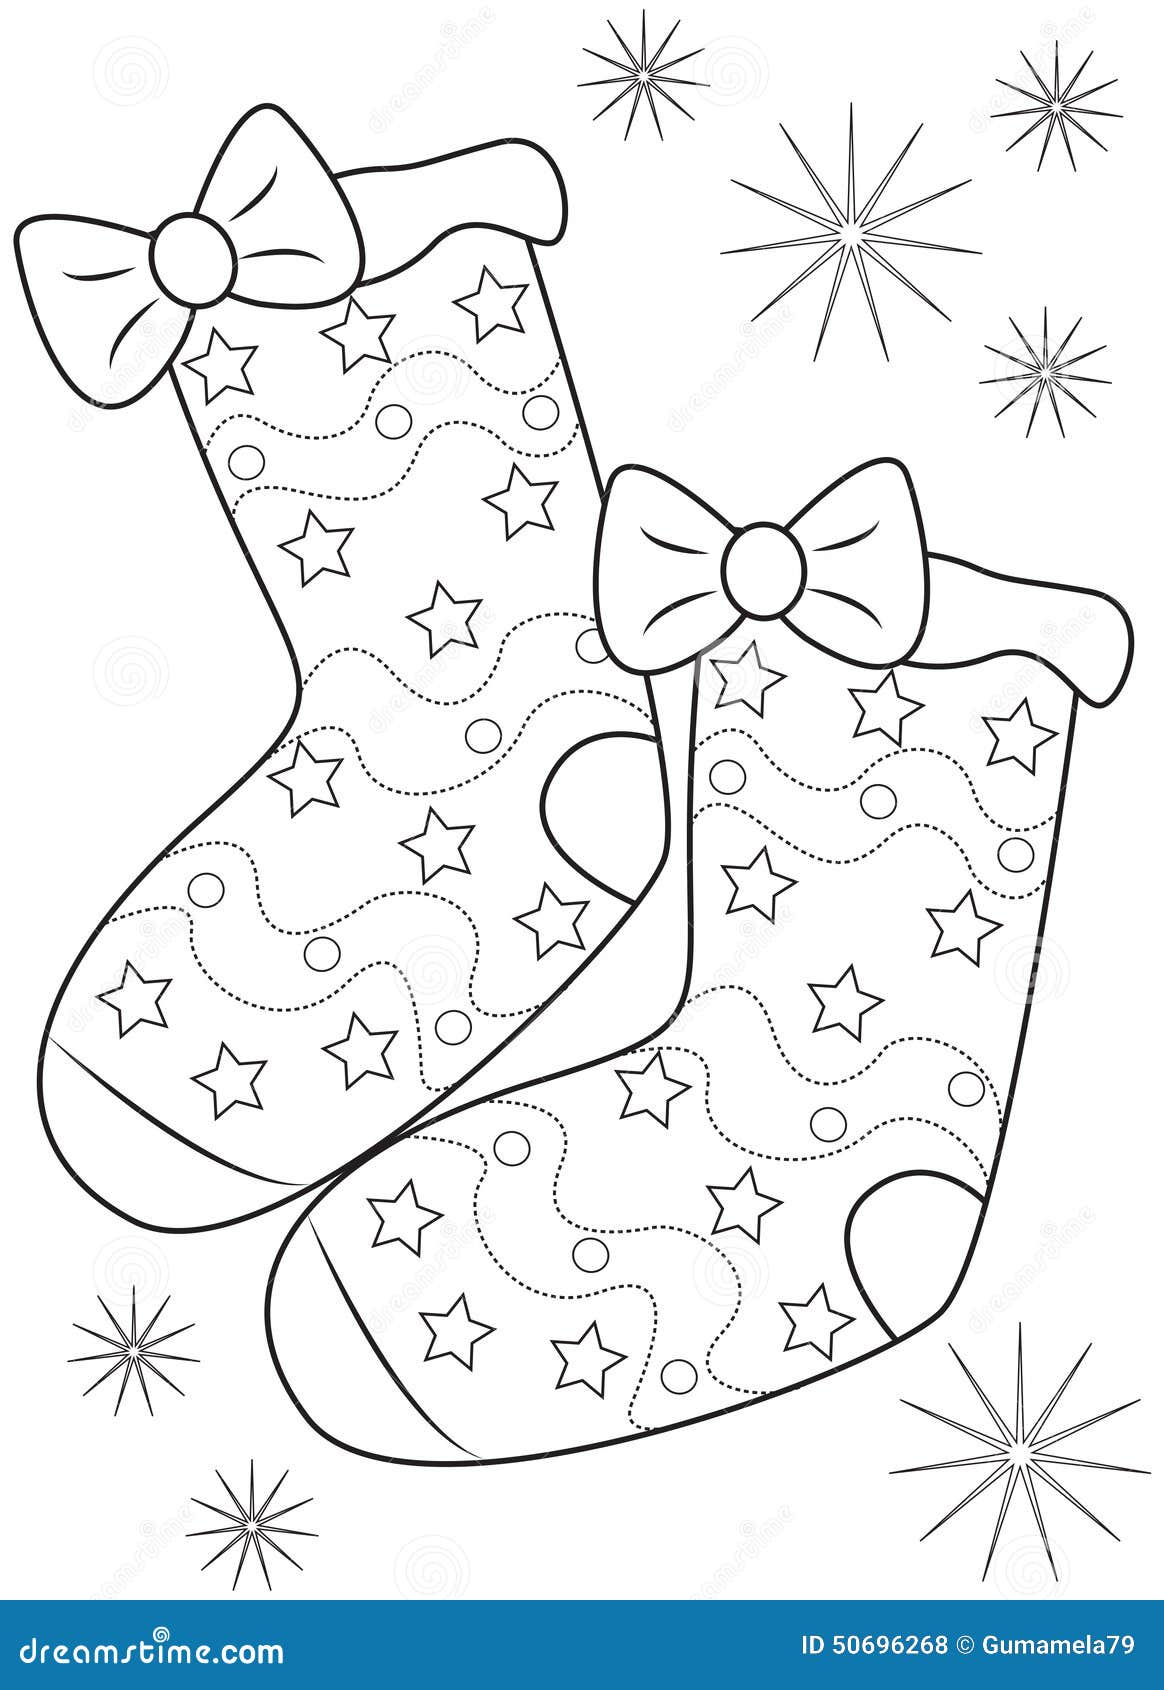 pair of socks coloring pages - photo #13